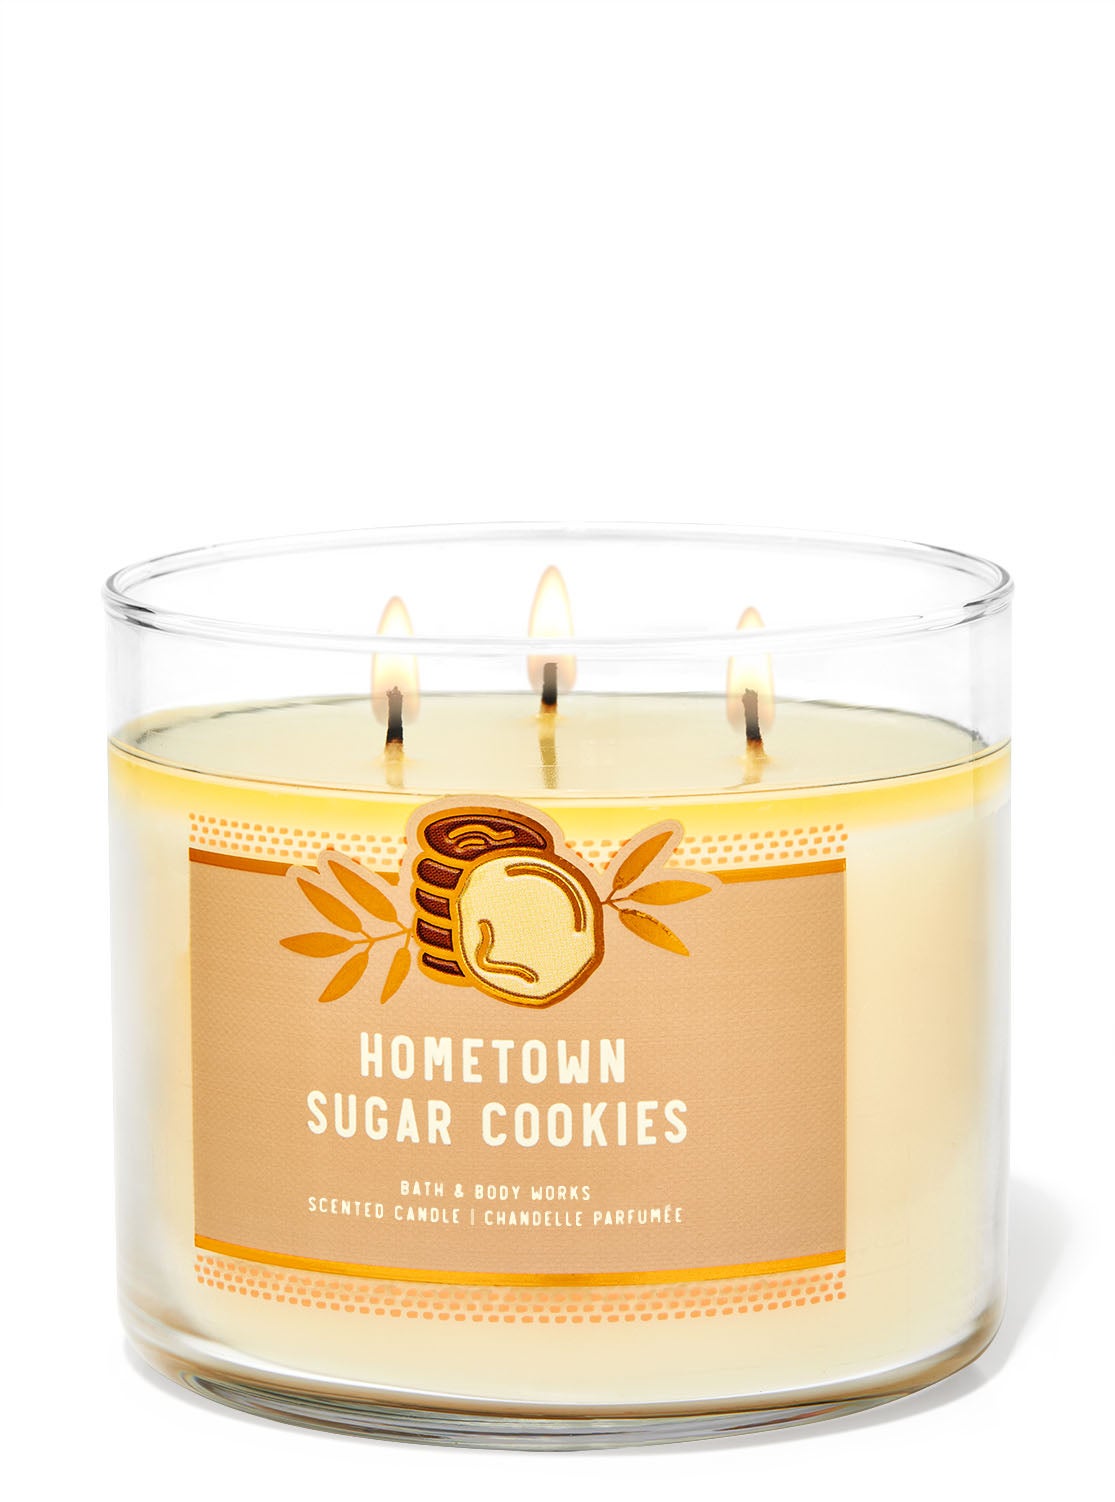 Hometown Sugar Cookies 3-Wick Candle | Bath and Body Works